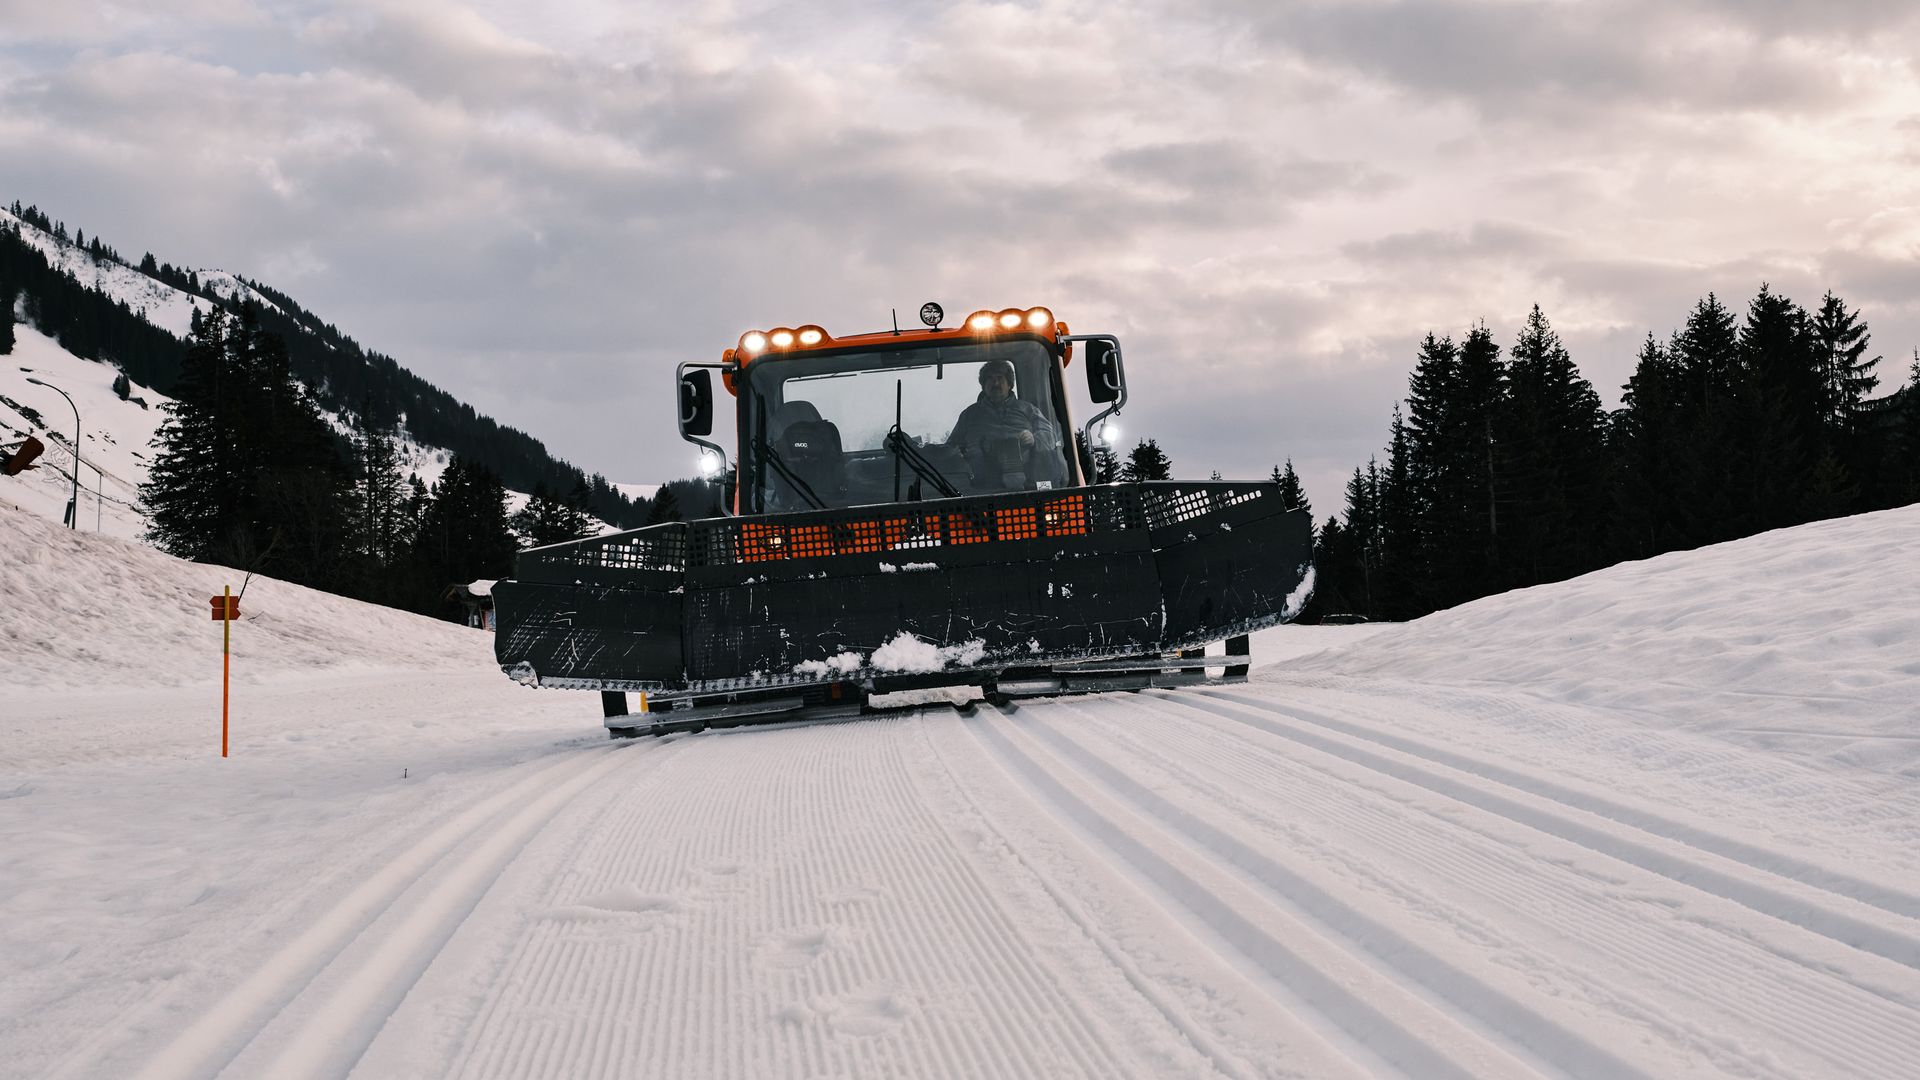 Snow groomer from the front following the cross-country ski tracks